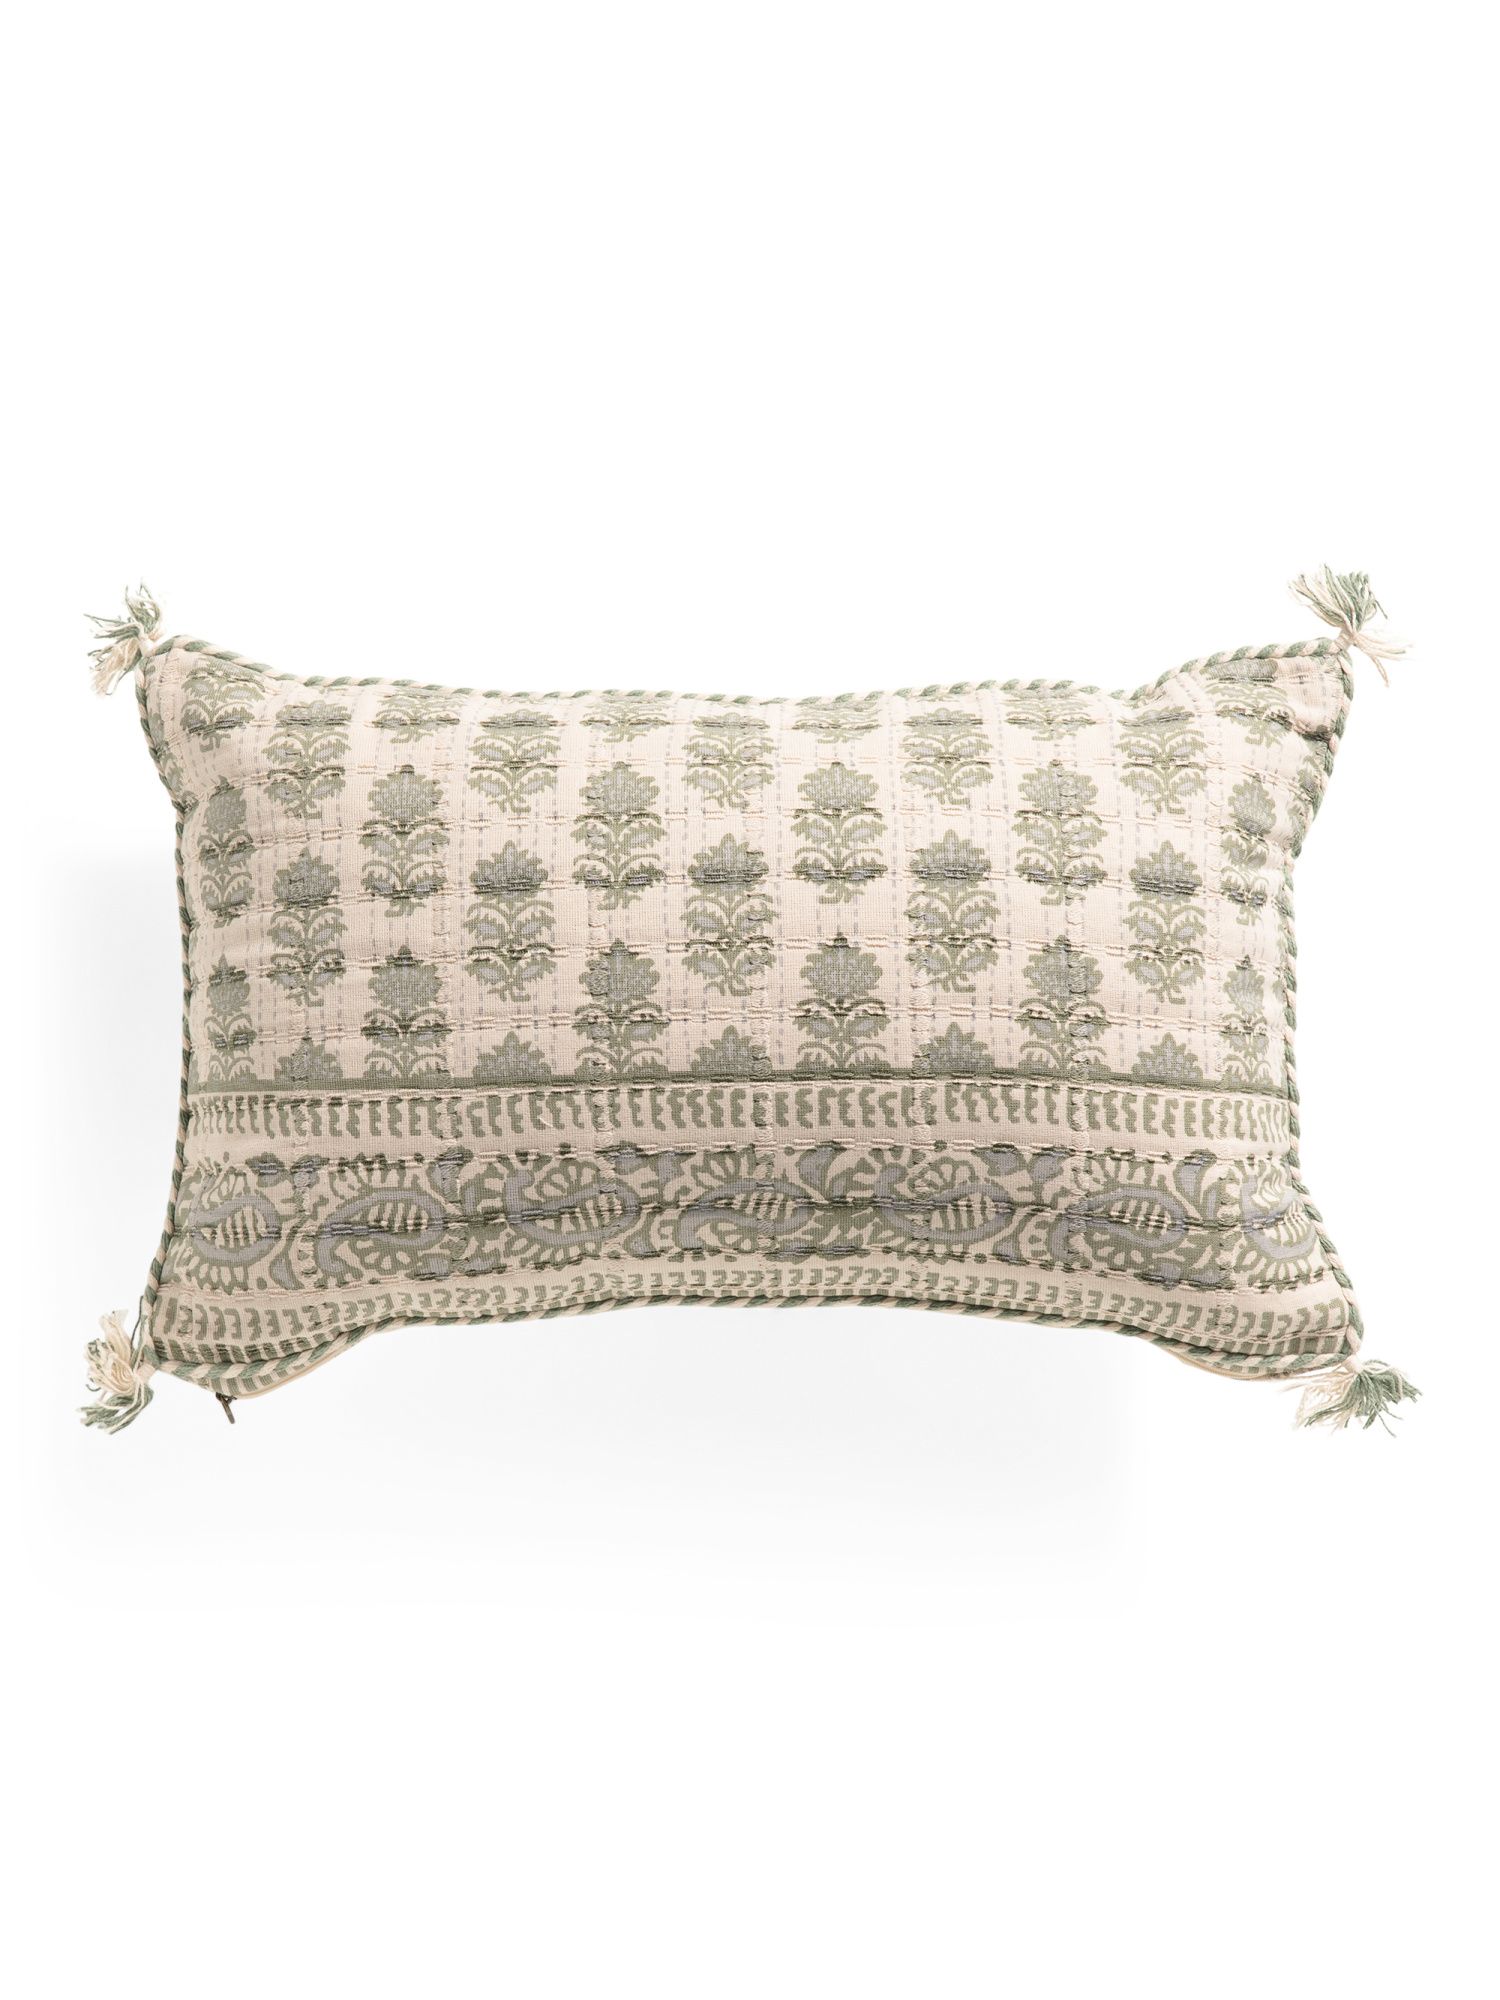 13x21 Indoor And Outdoor Block Print Pillow With Tassels | TJ Maxx